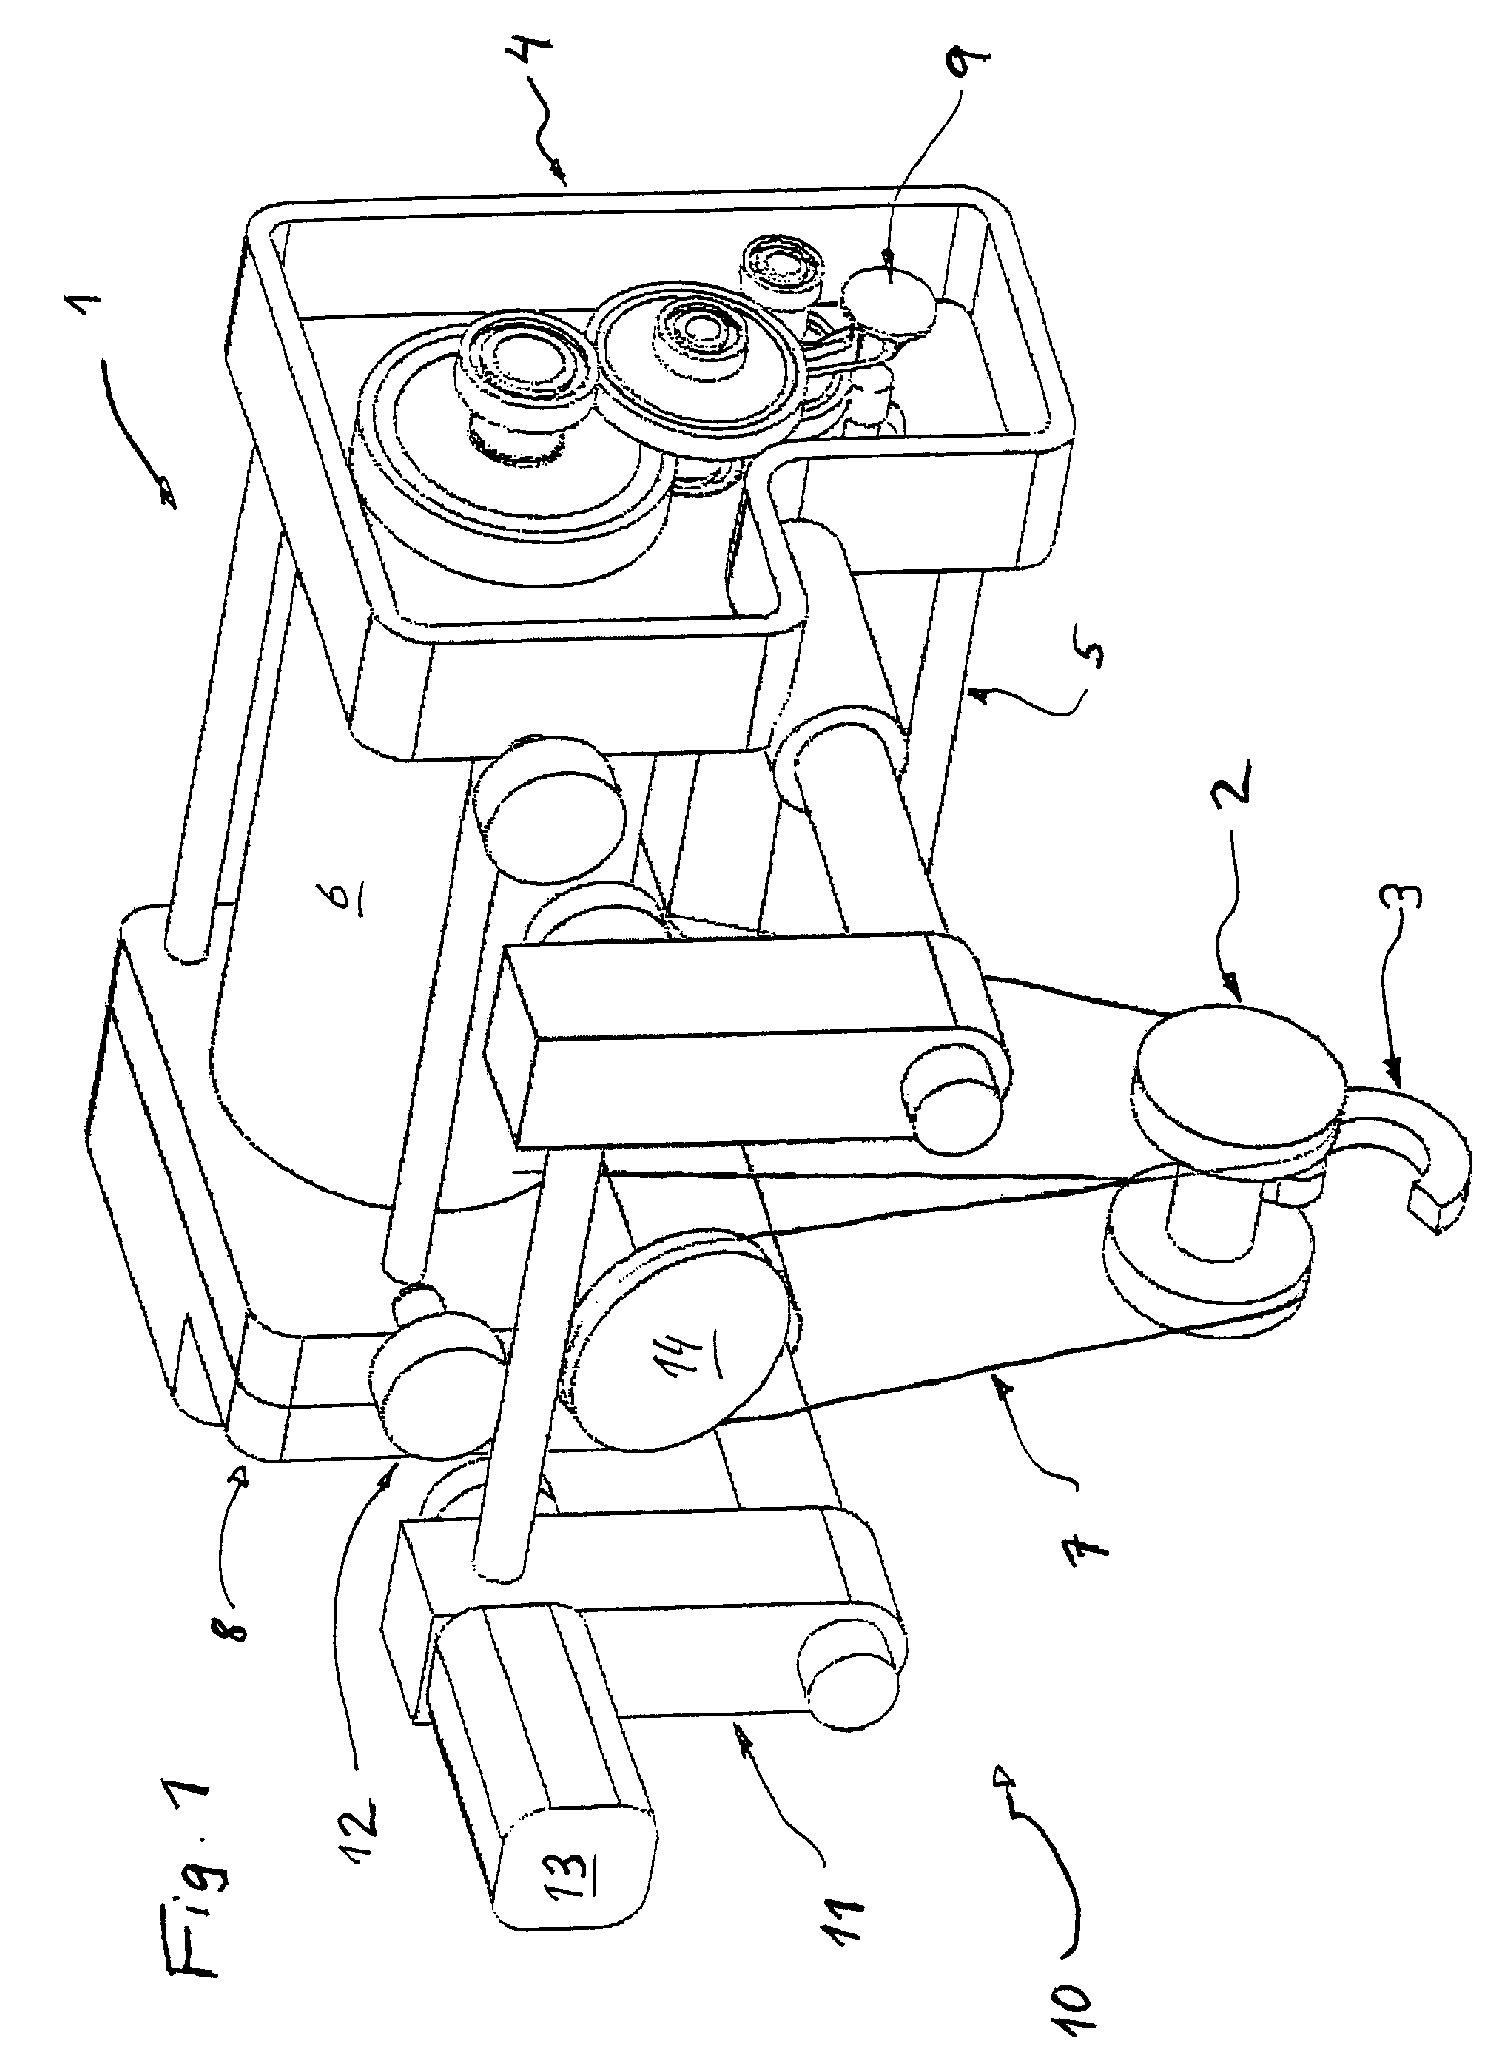 Hoisting device with load measuring mechanism and method for determining the load of hoisting devices